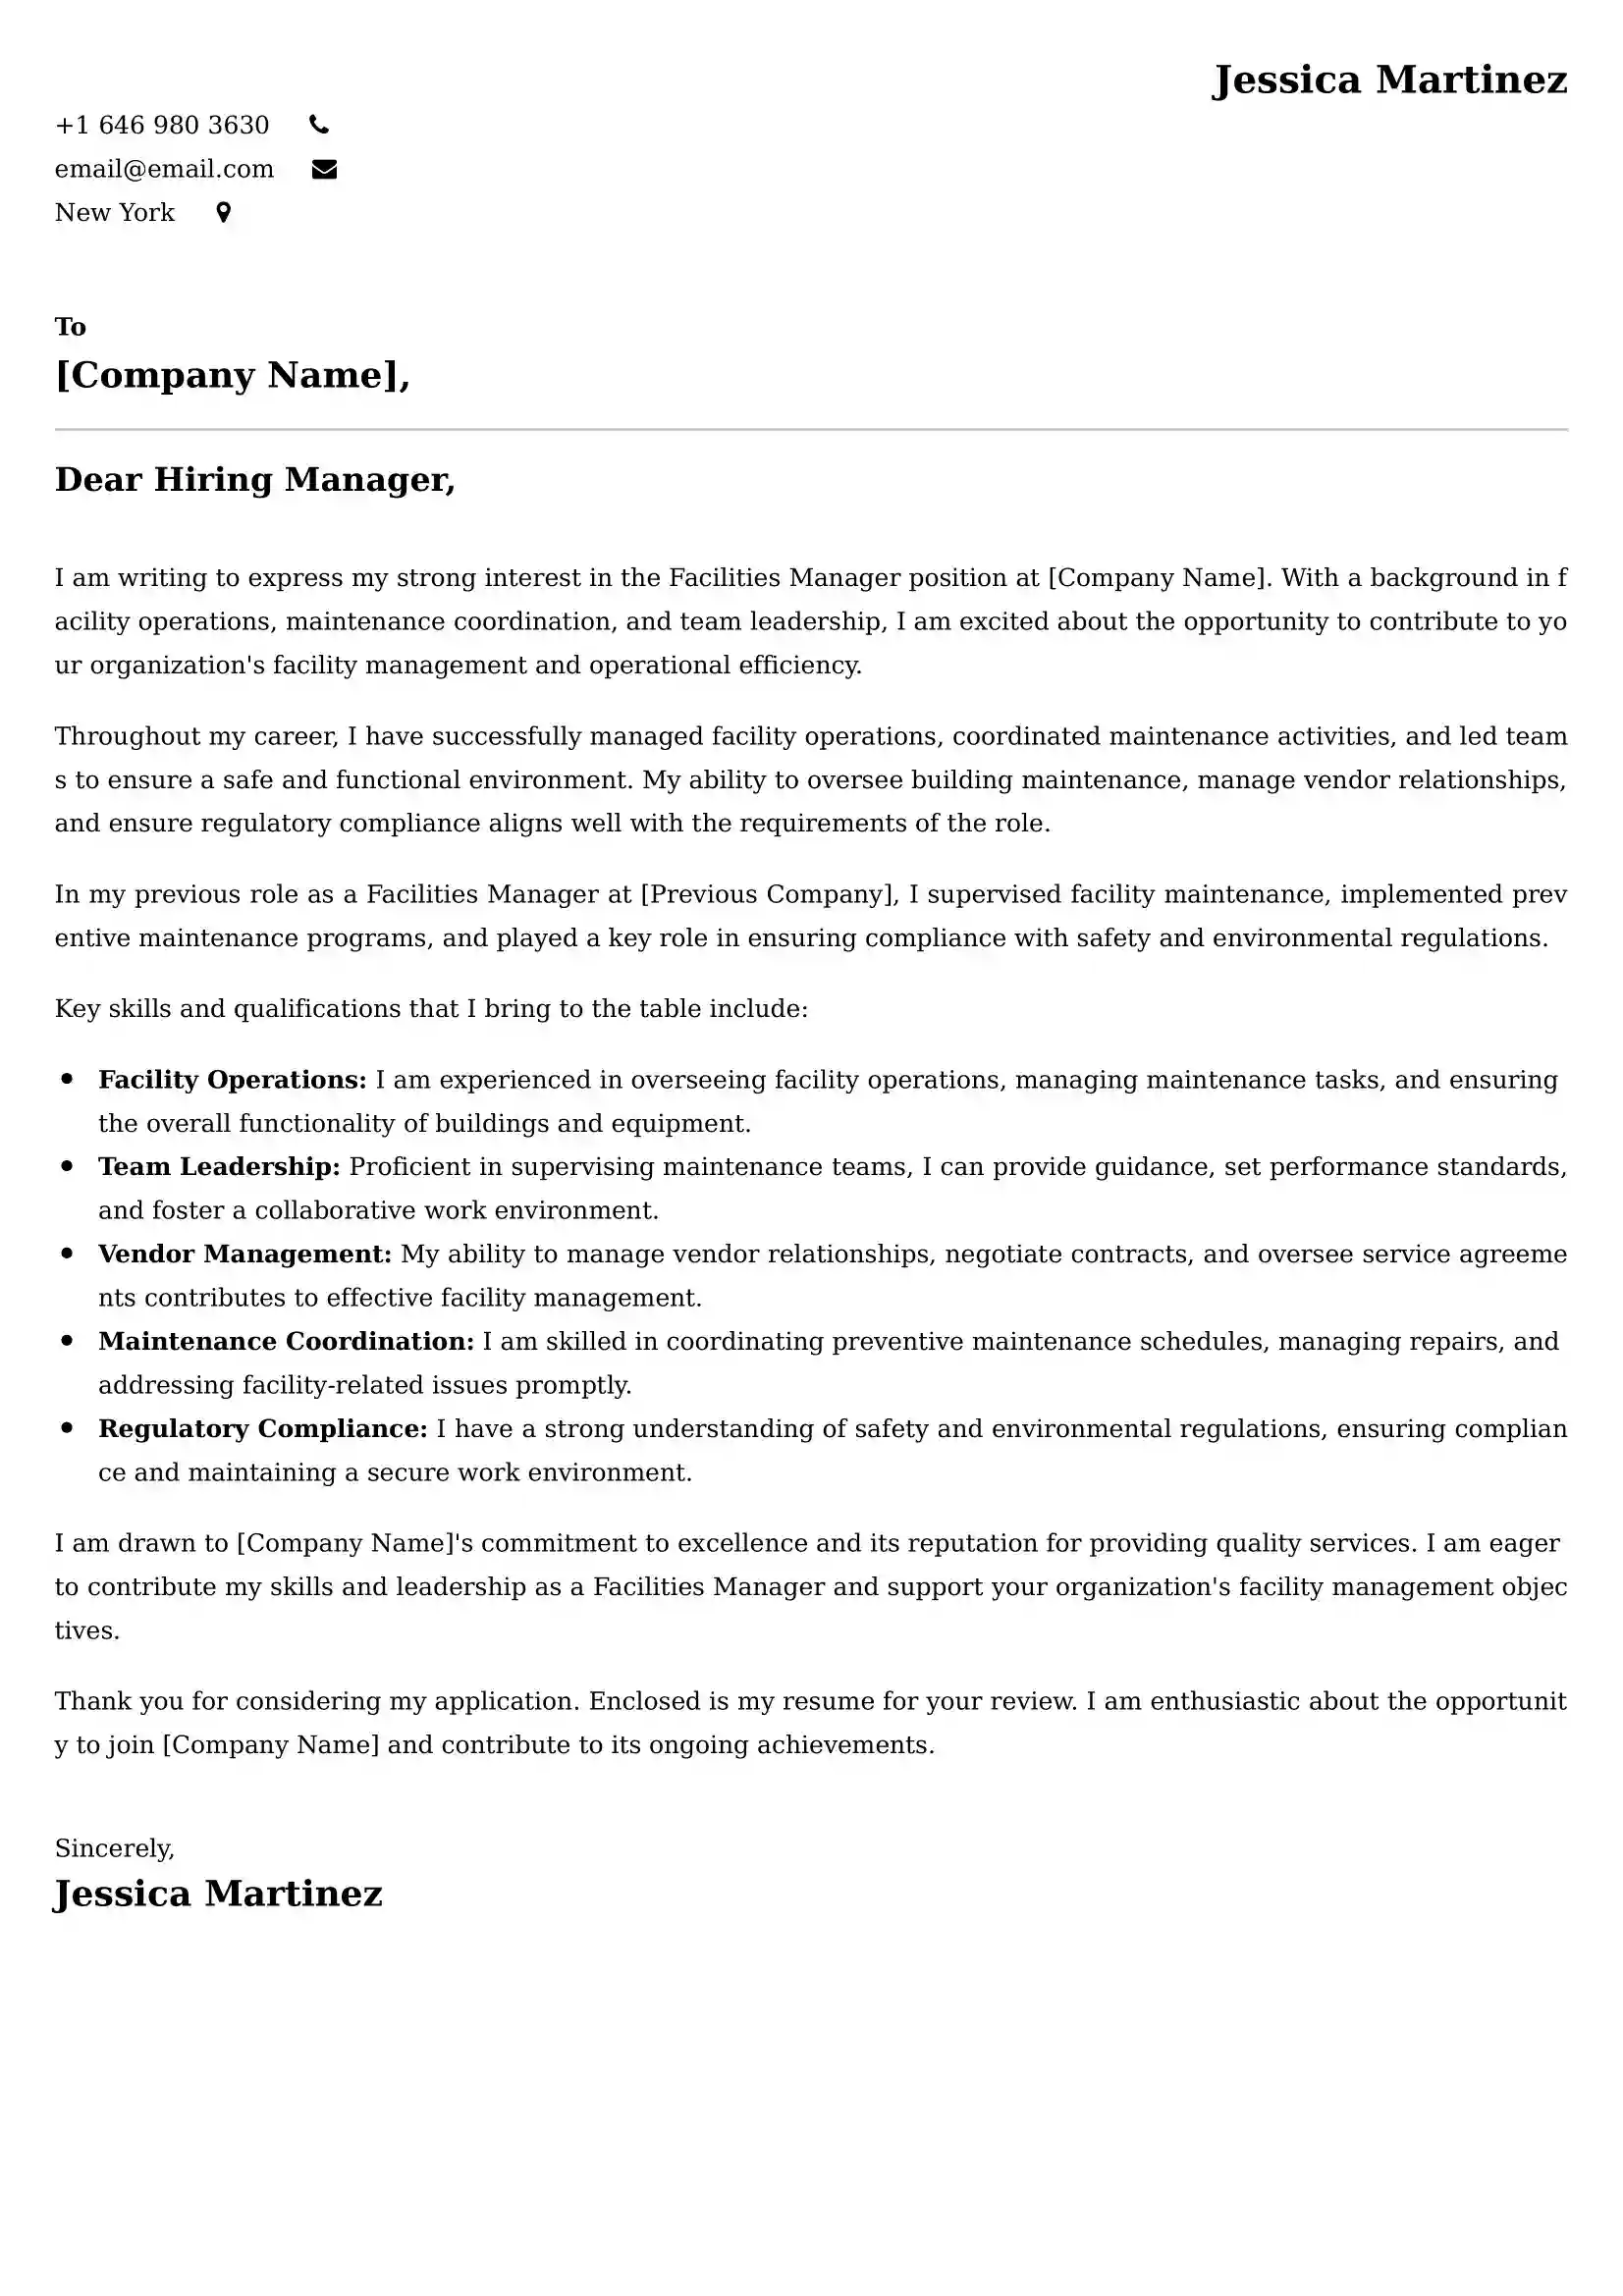 Facilities Manager Cover Letter Examples - Latest UK Format